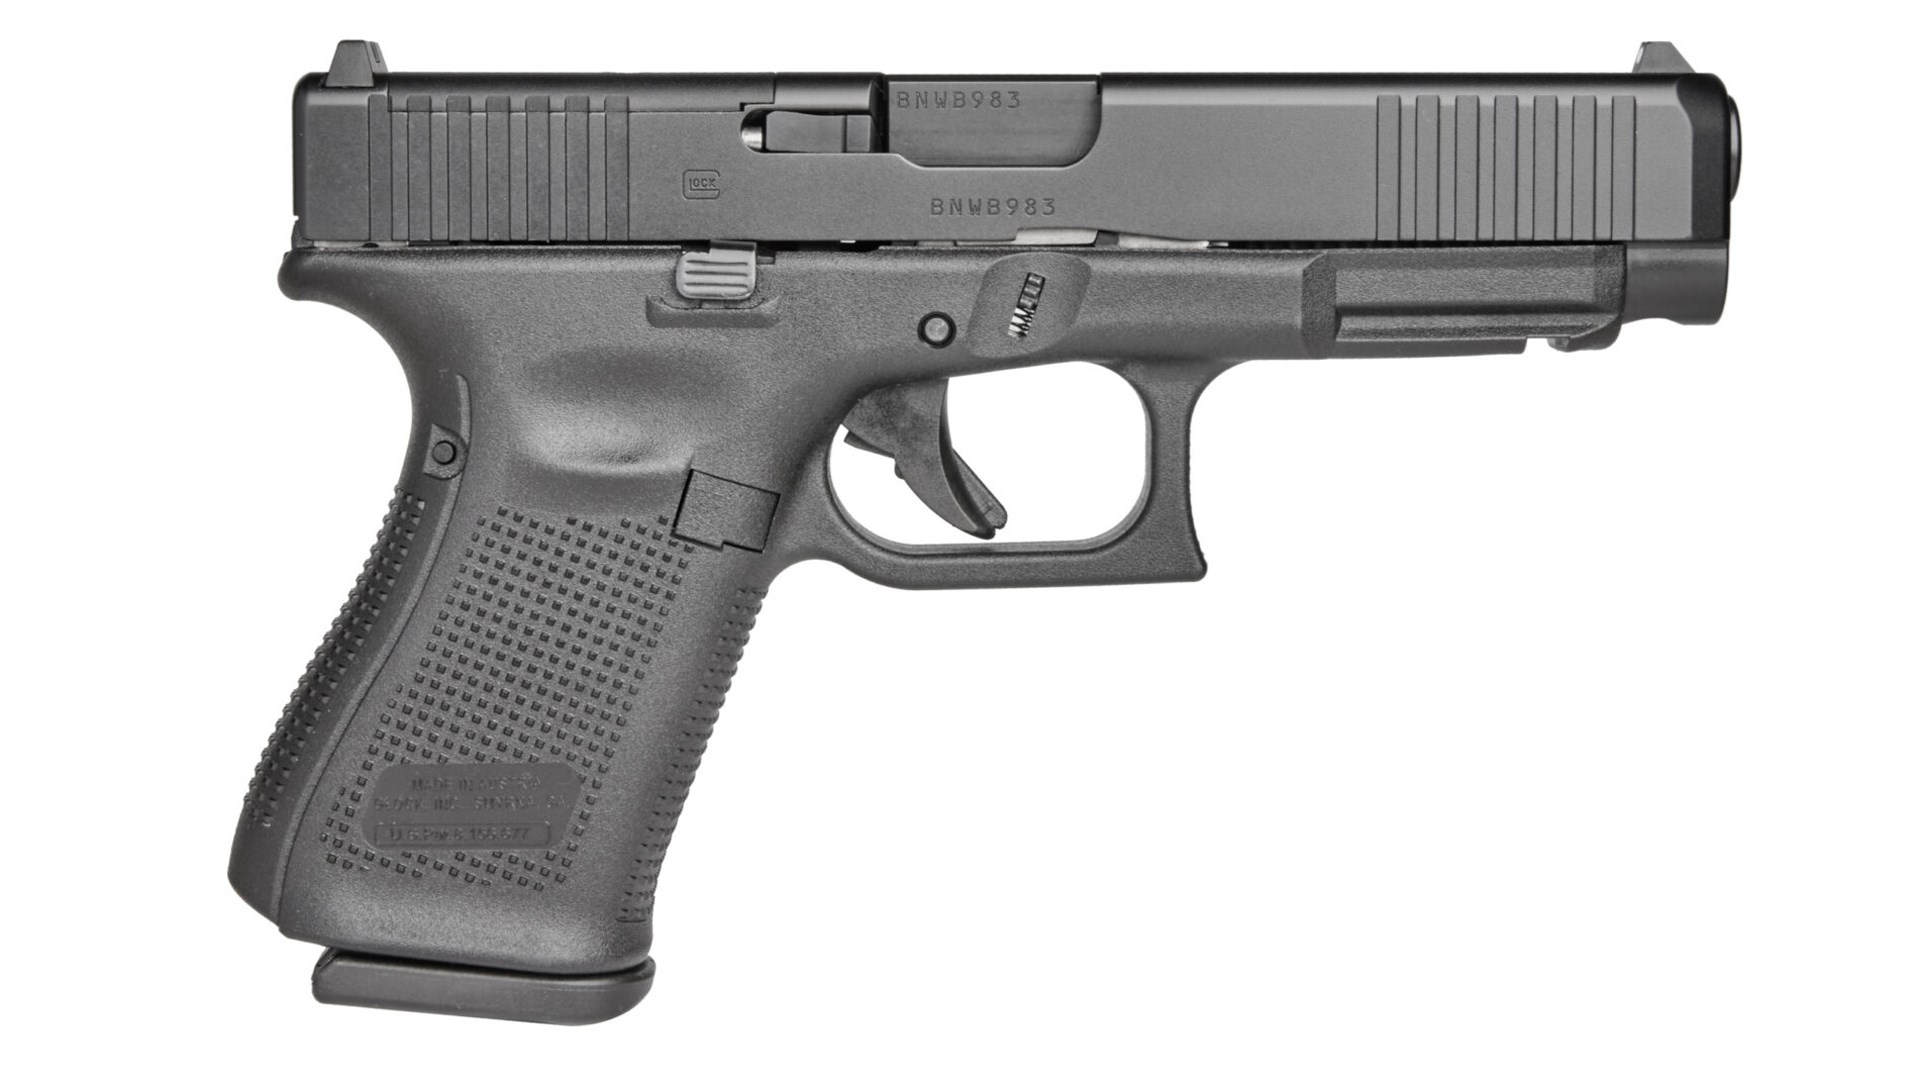 Right side of the black Glock 49 MOS pistol.